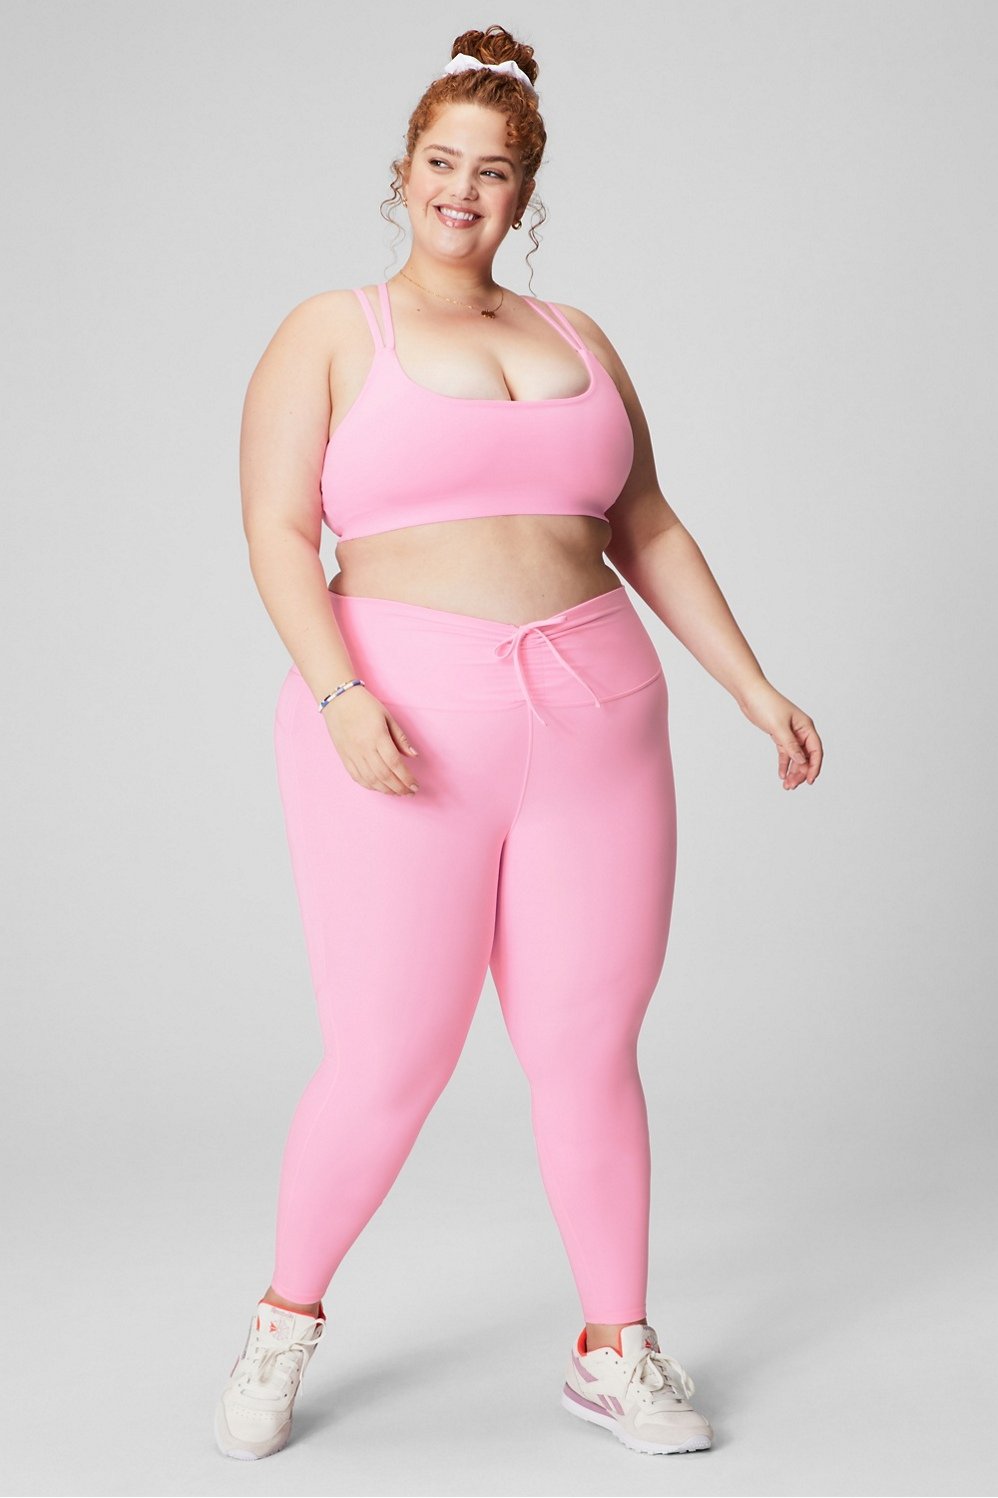 Plus Model Magazine - High-Waisted Lattice-Hem Plus-Size Leggings $23 20%  Off with Code SWEET Size 3X and 4X available Click here